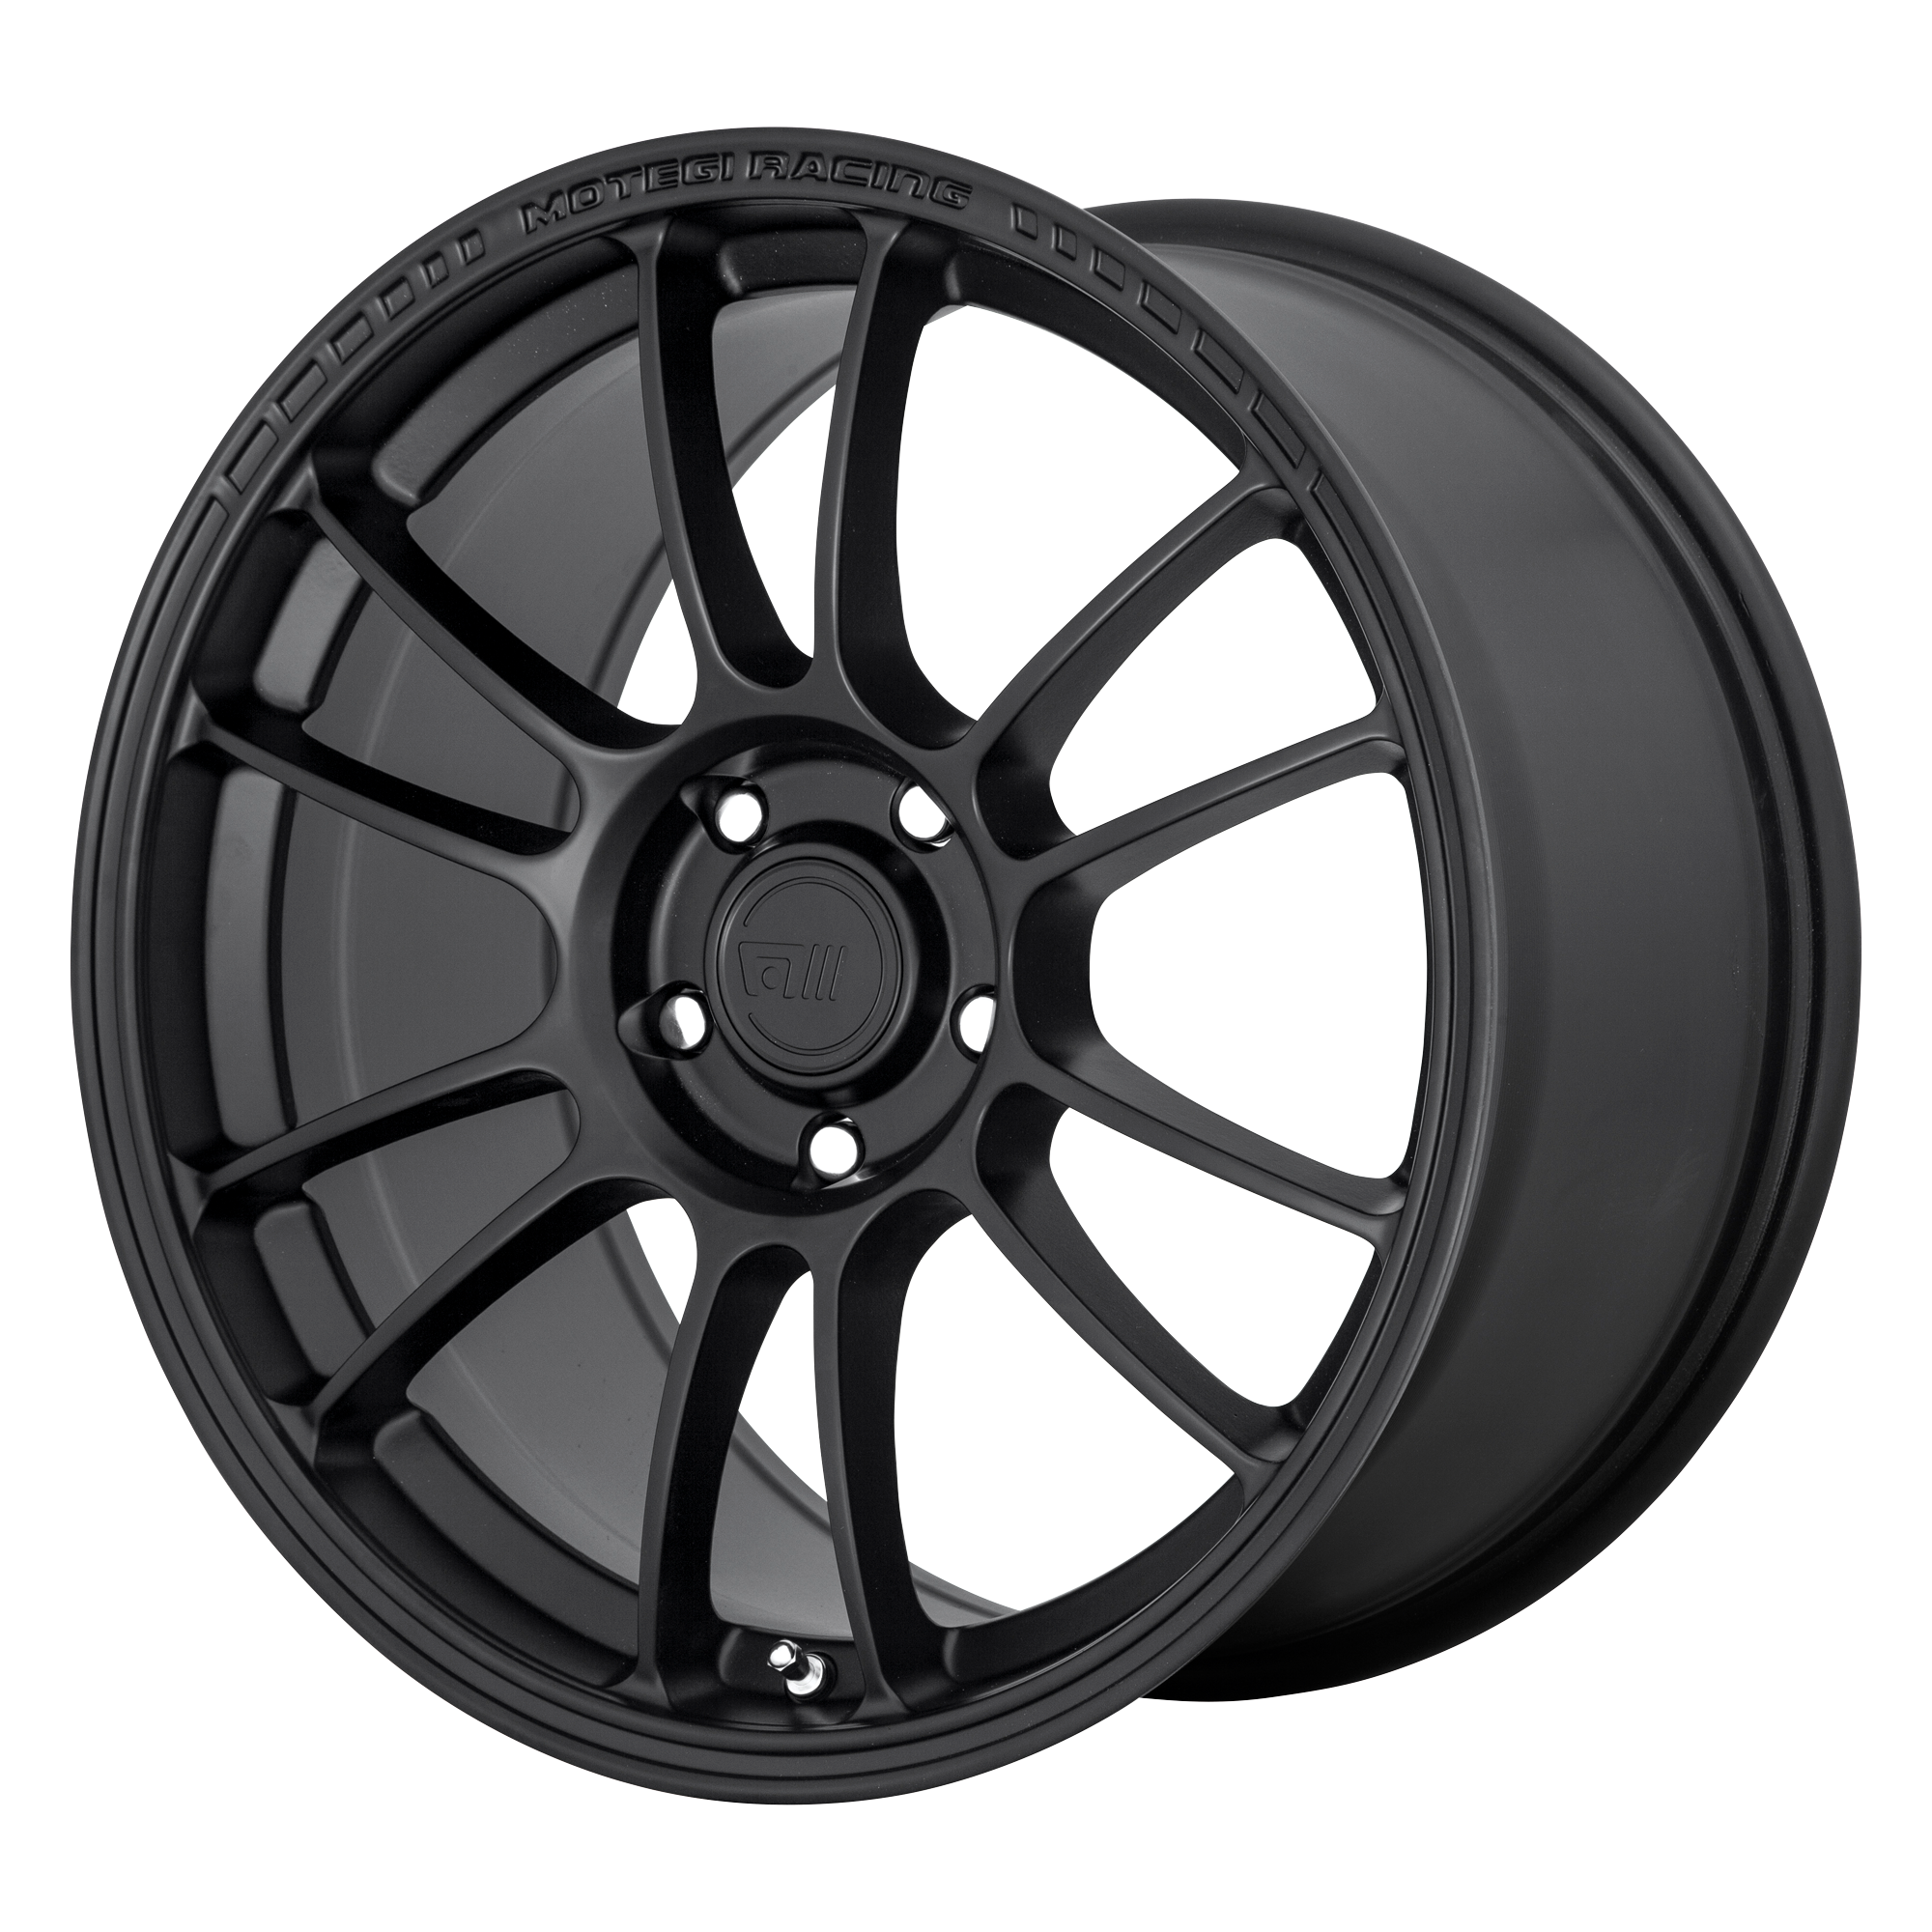 SS6 18x8.5 5x100.00 SATIN BLACK (42 mm) - Tires and Engine Performance